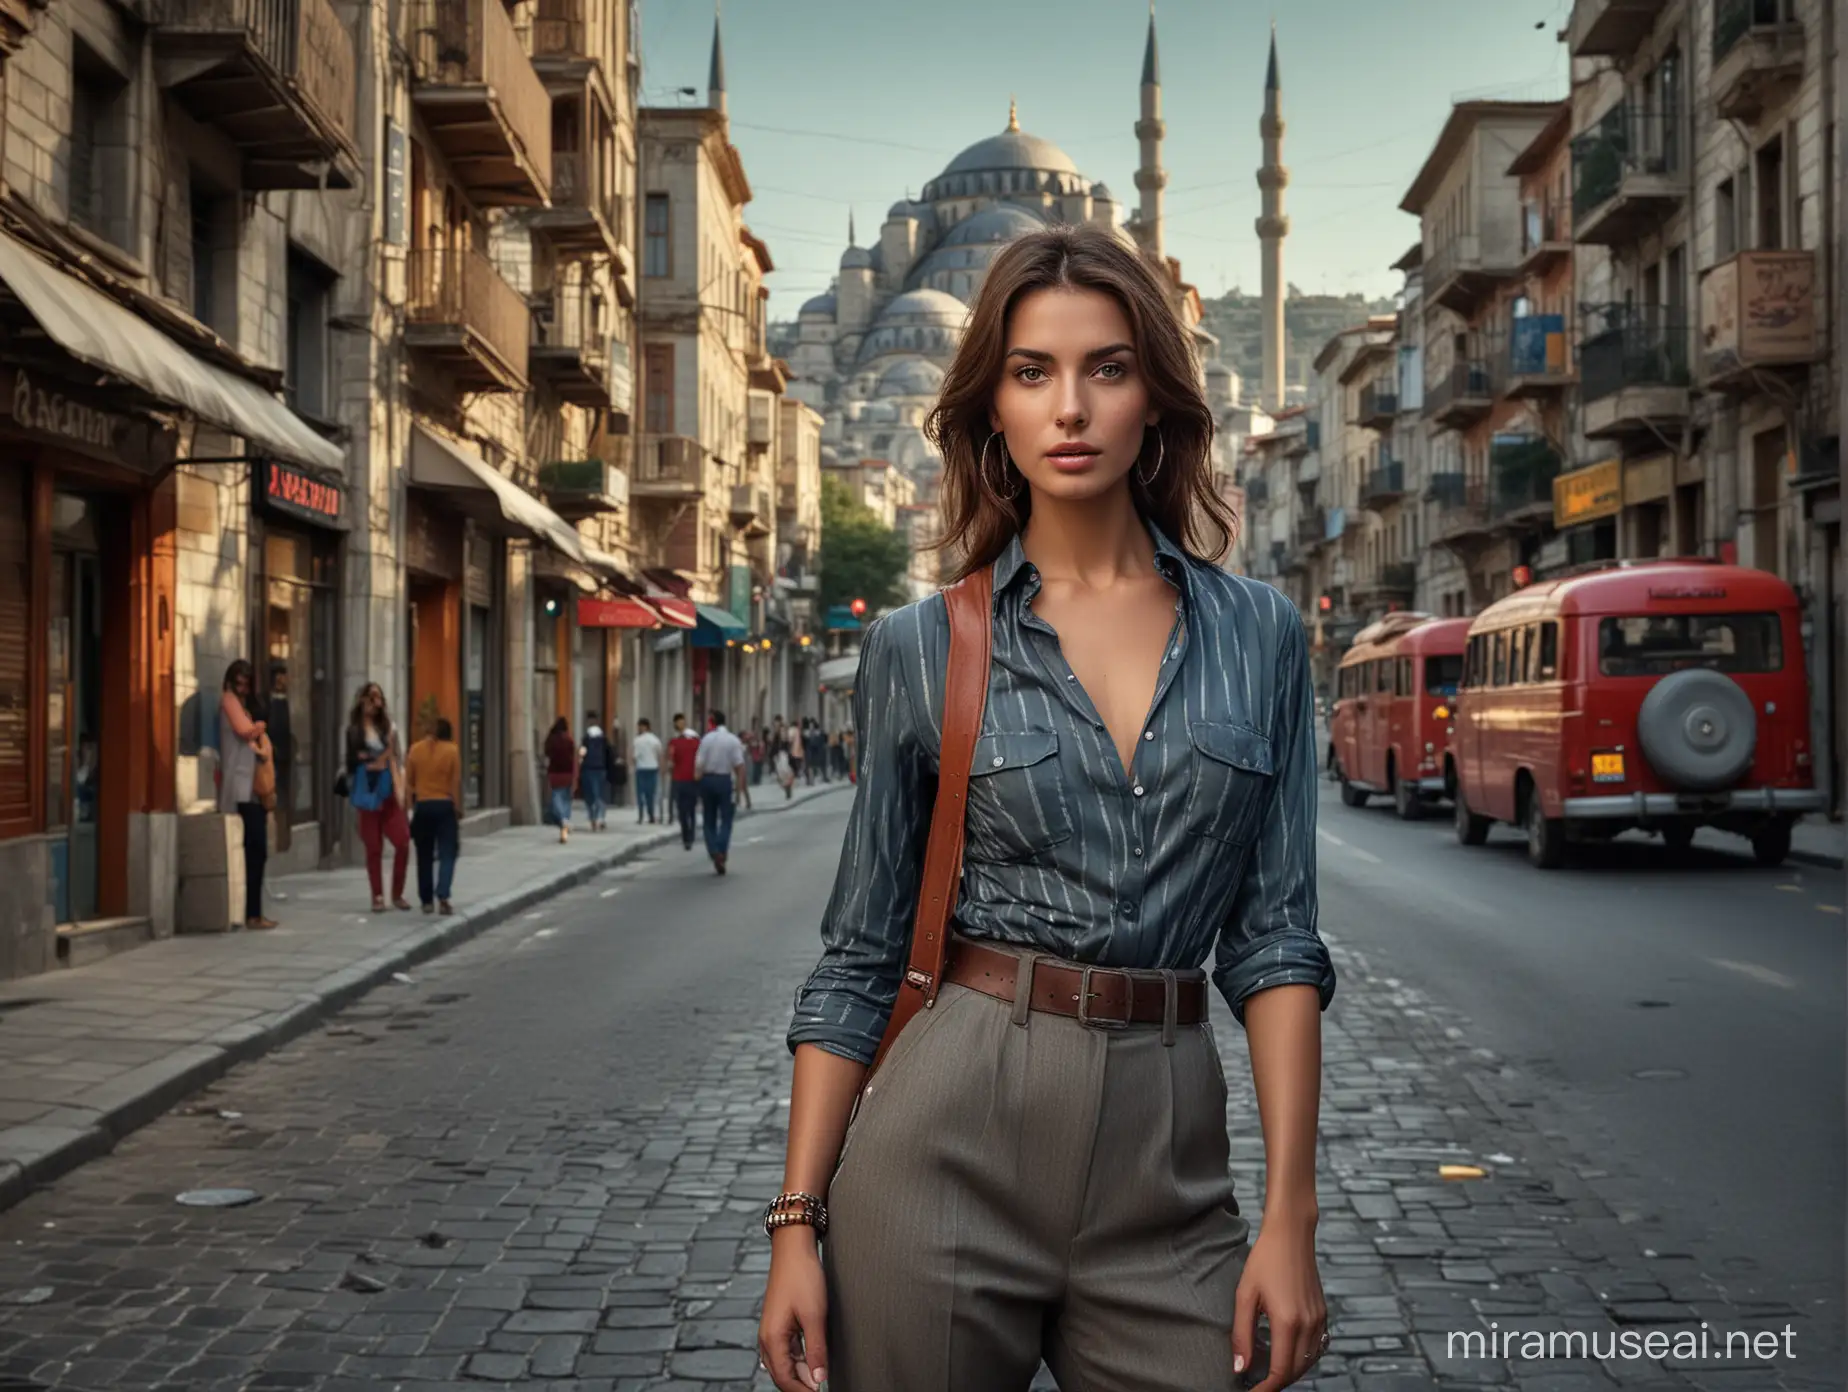 Elegant Fashion Portrait of a Woman in Istanbuls Vibrant Streets